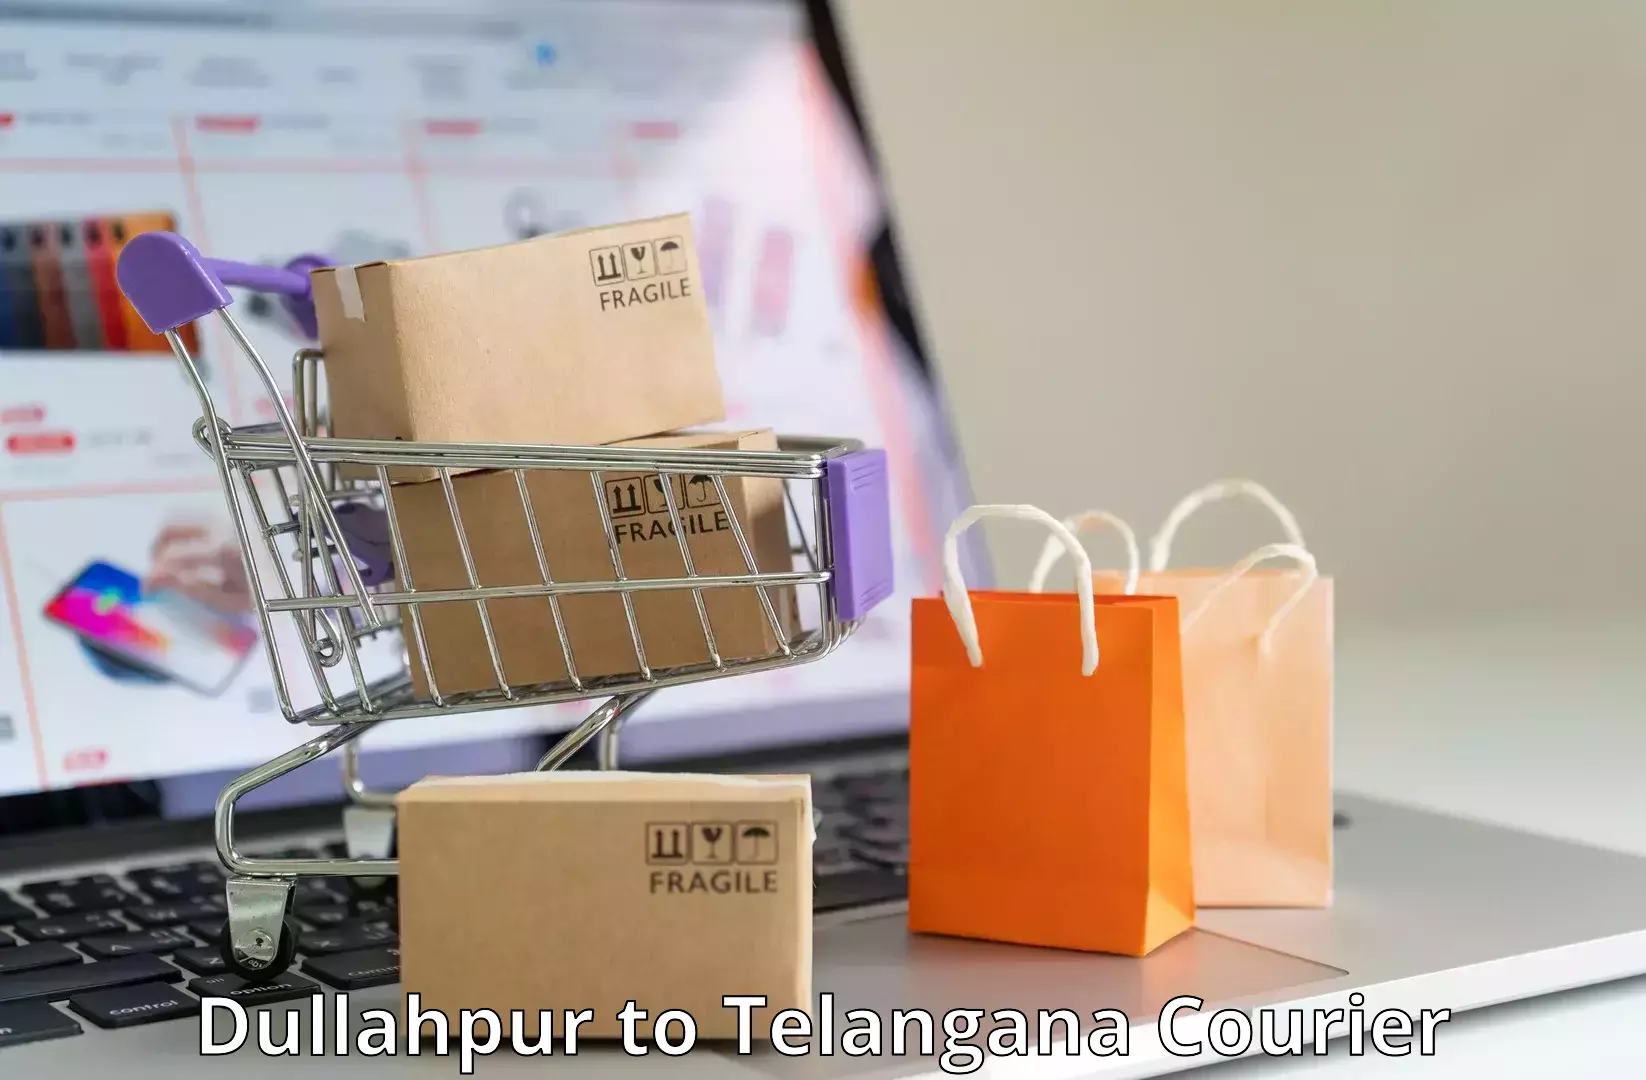 Delivery service partnership Dullahpur to Mancherial